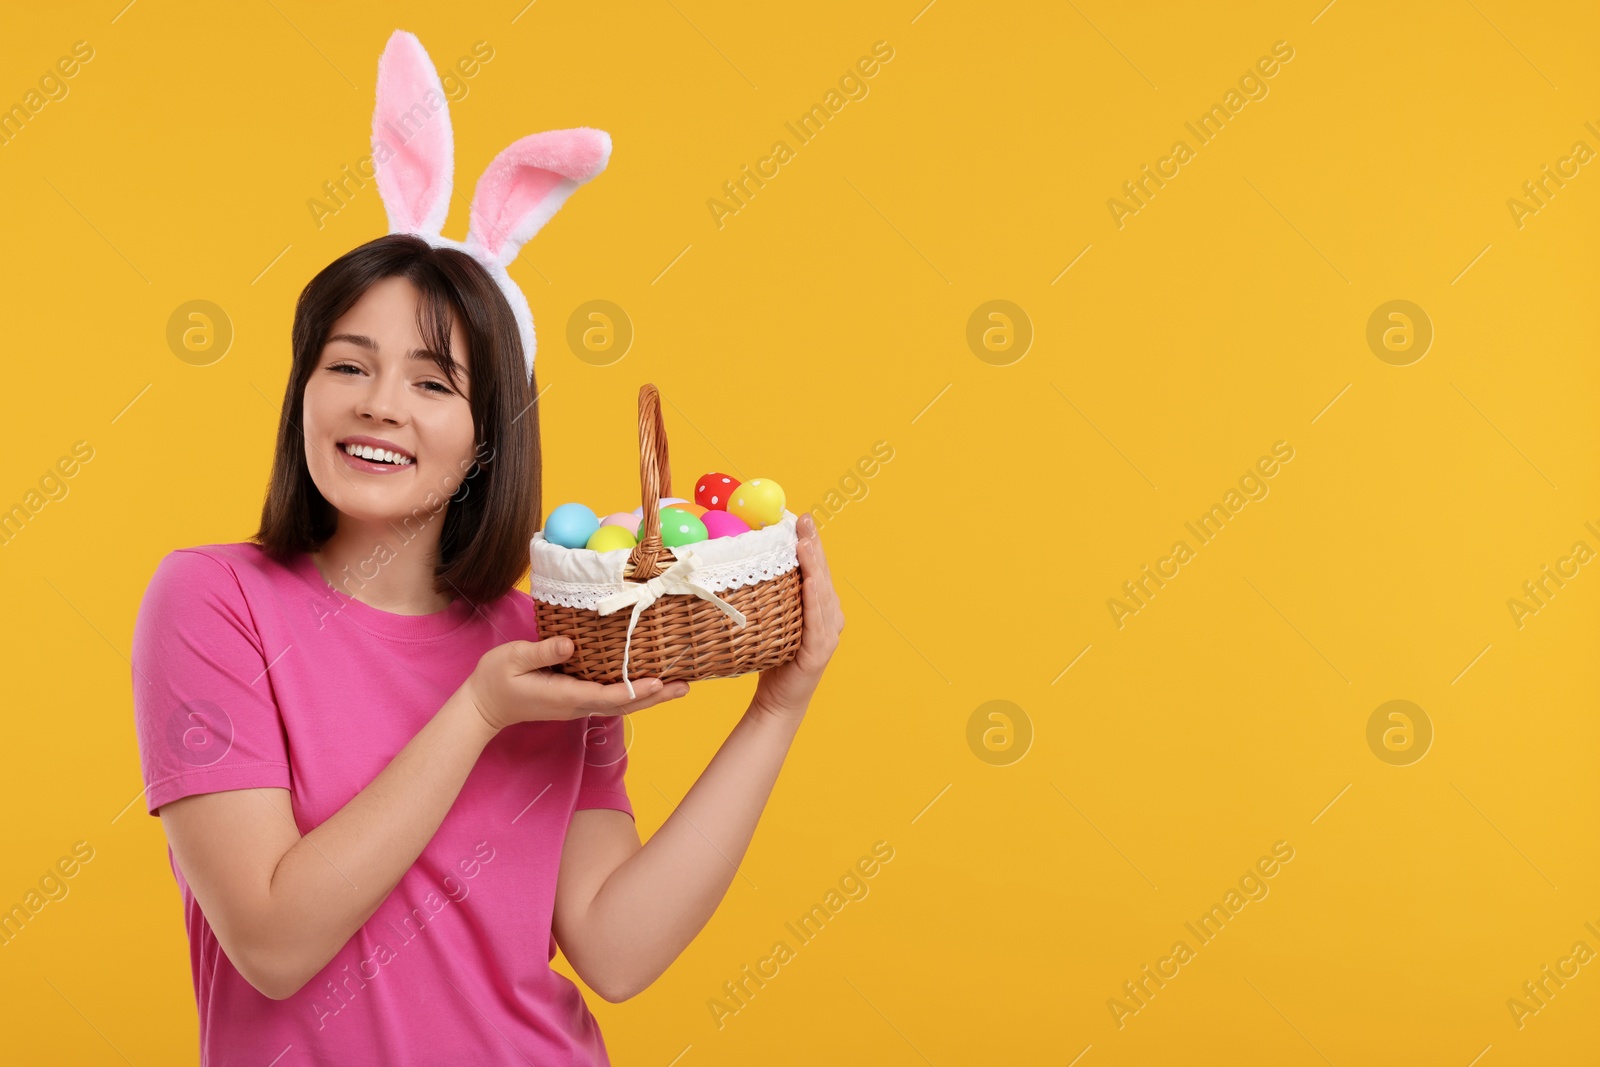 Photo of Easter celebration. Happy woman with bunny ears and wicker basket full of painted eggs on orange background, space for text